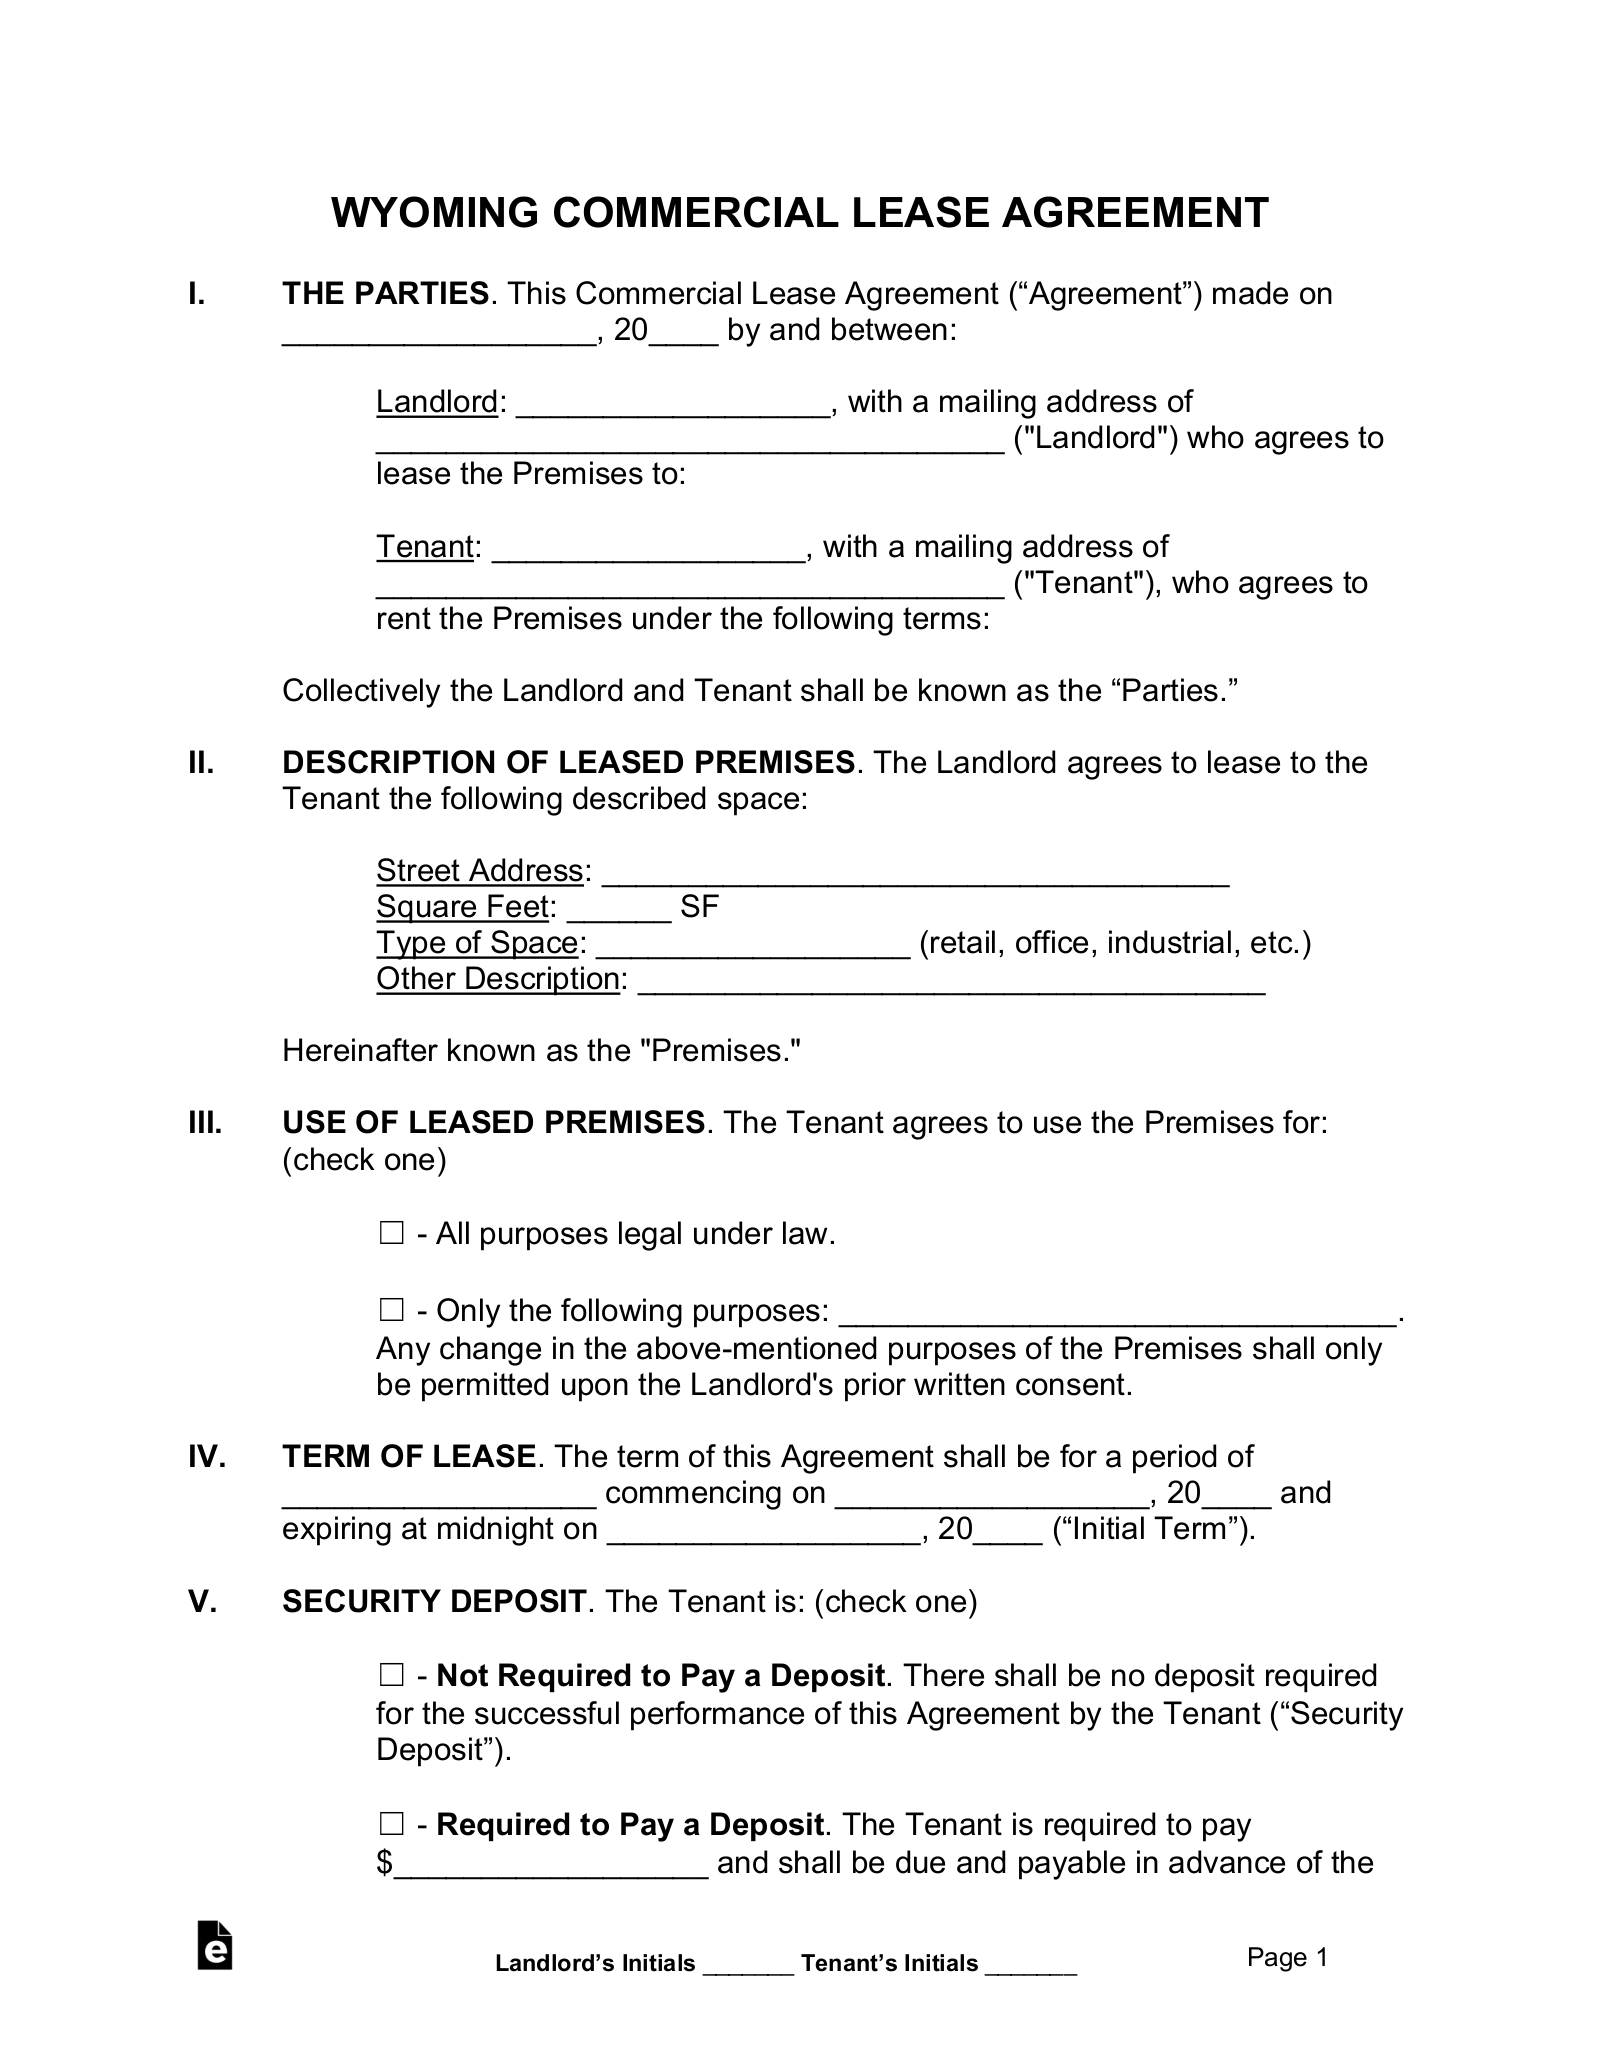 Wyoming Commercial Lease Agreement Form